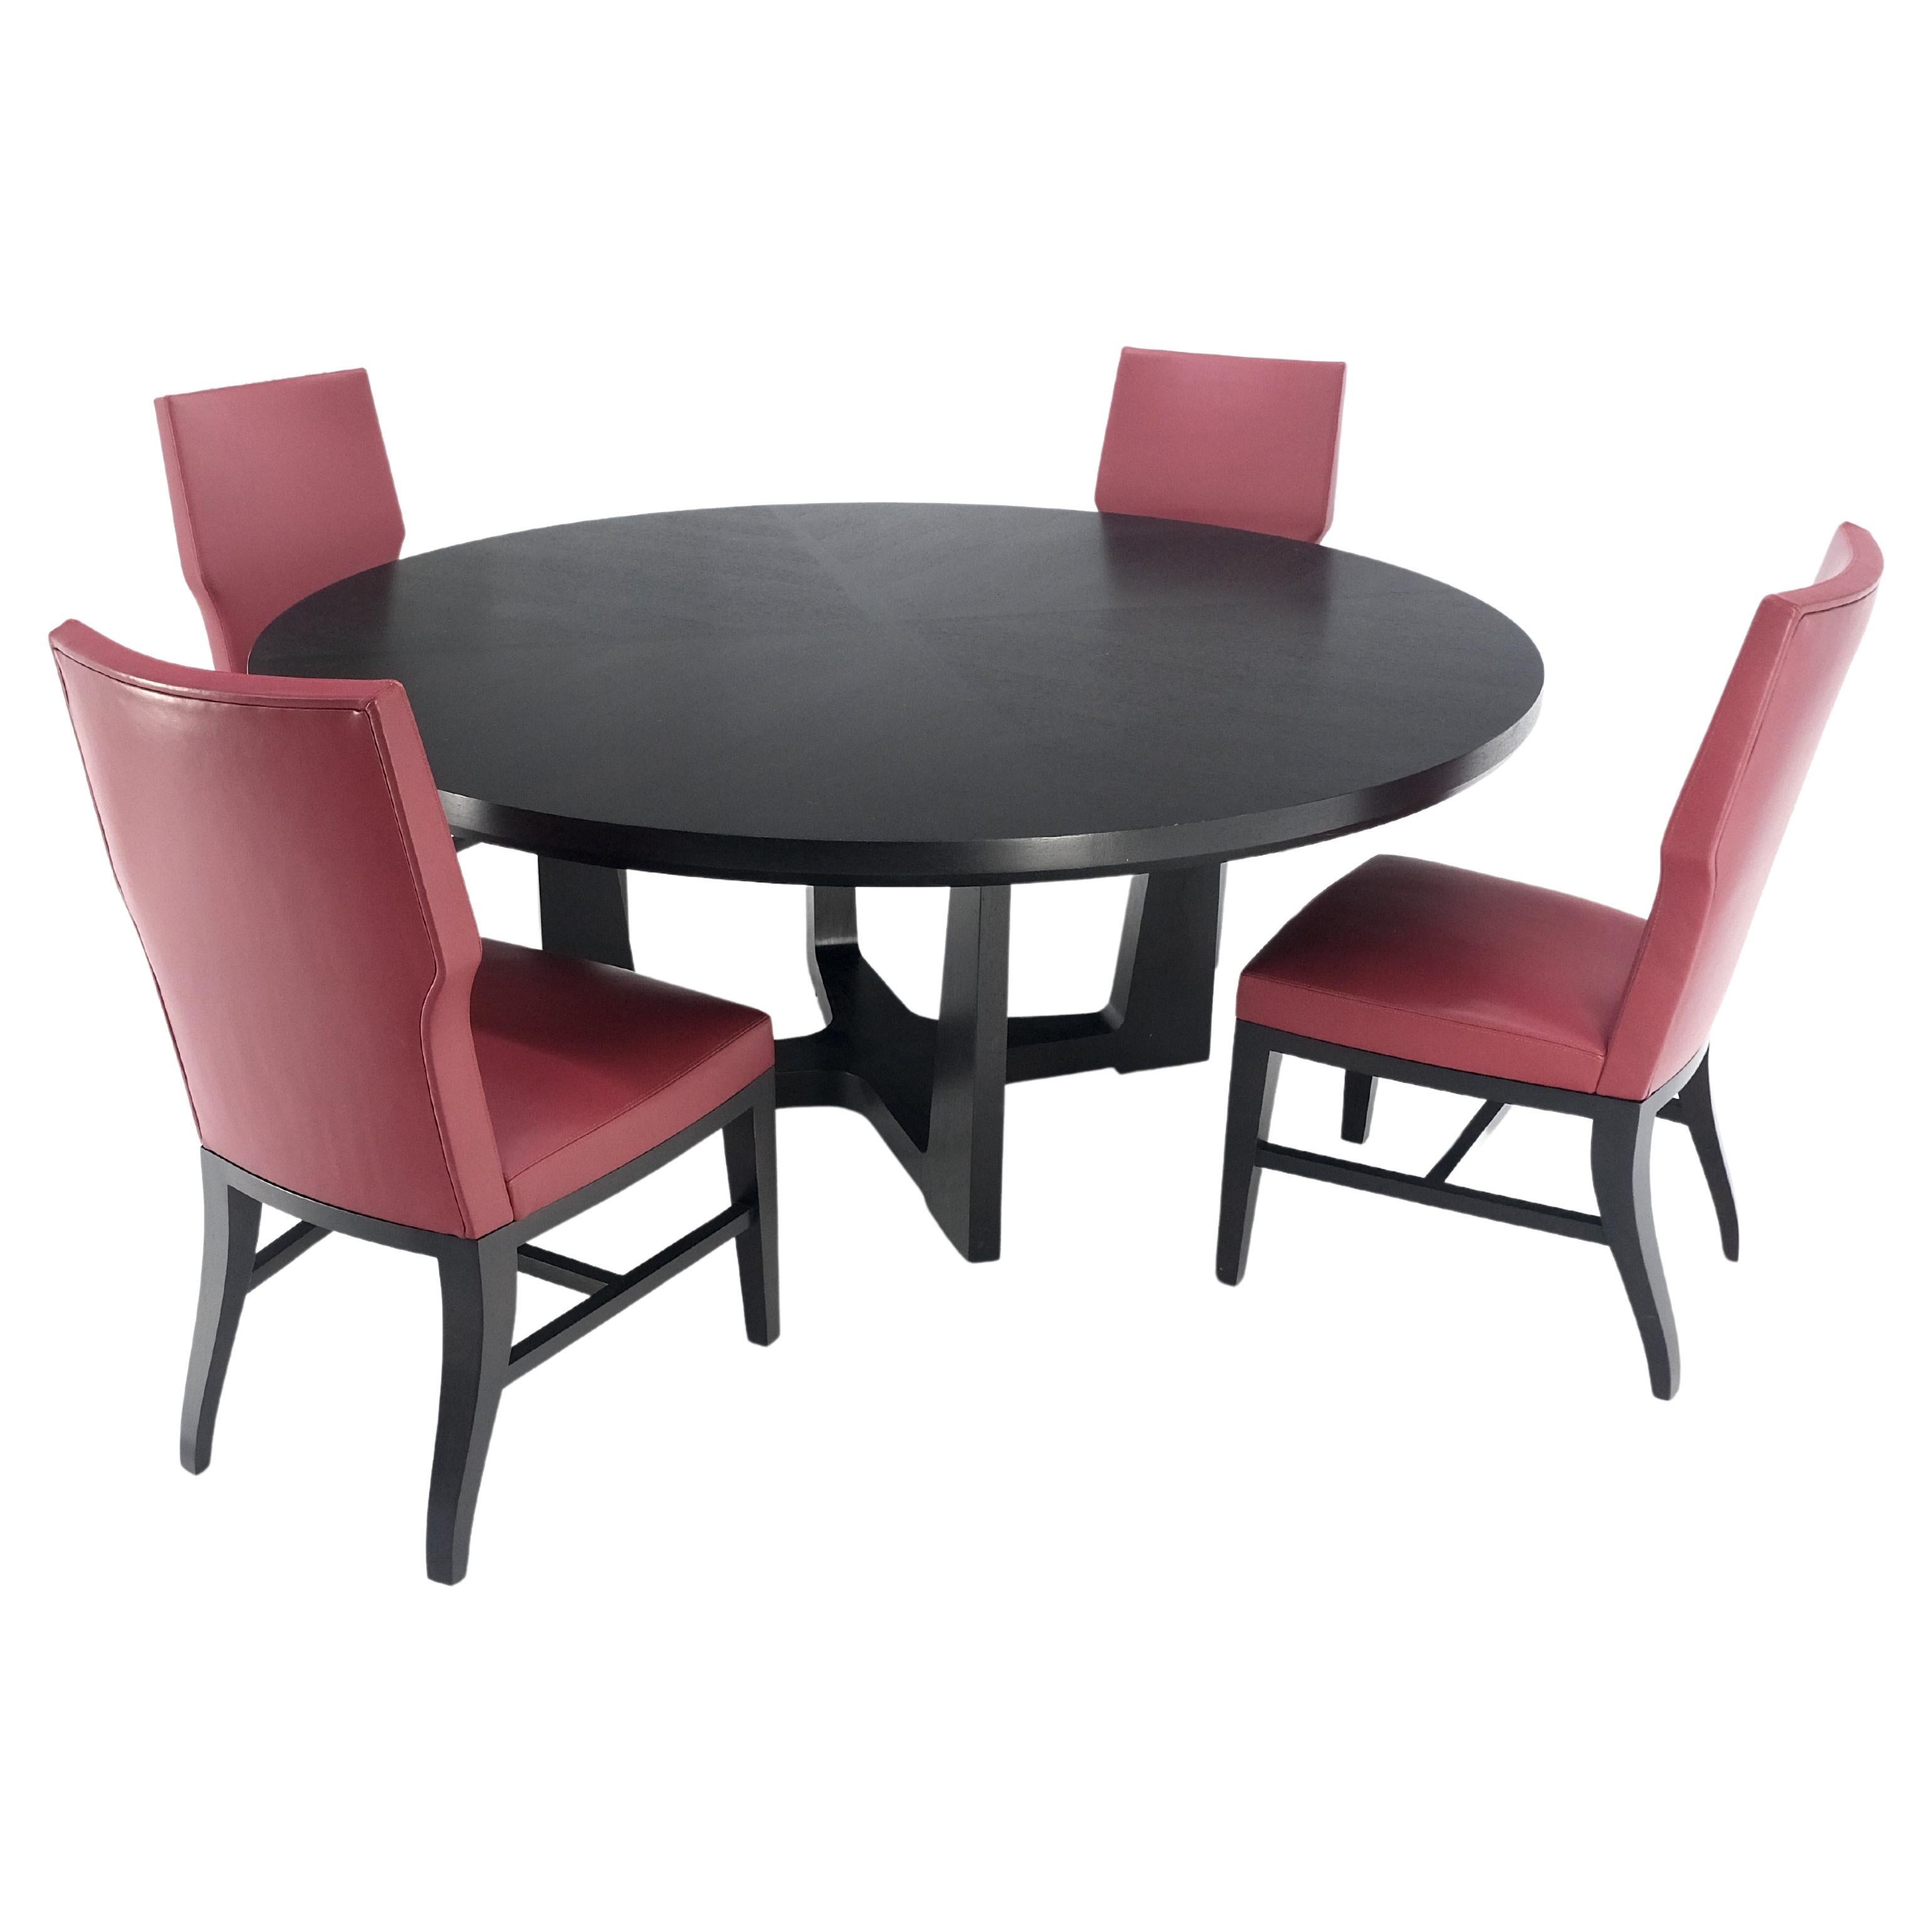 Holly Hunt Large 6' Diameter Round Ebonized Table Oak 4 Chairs Dining Set MINT! For Sale